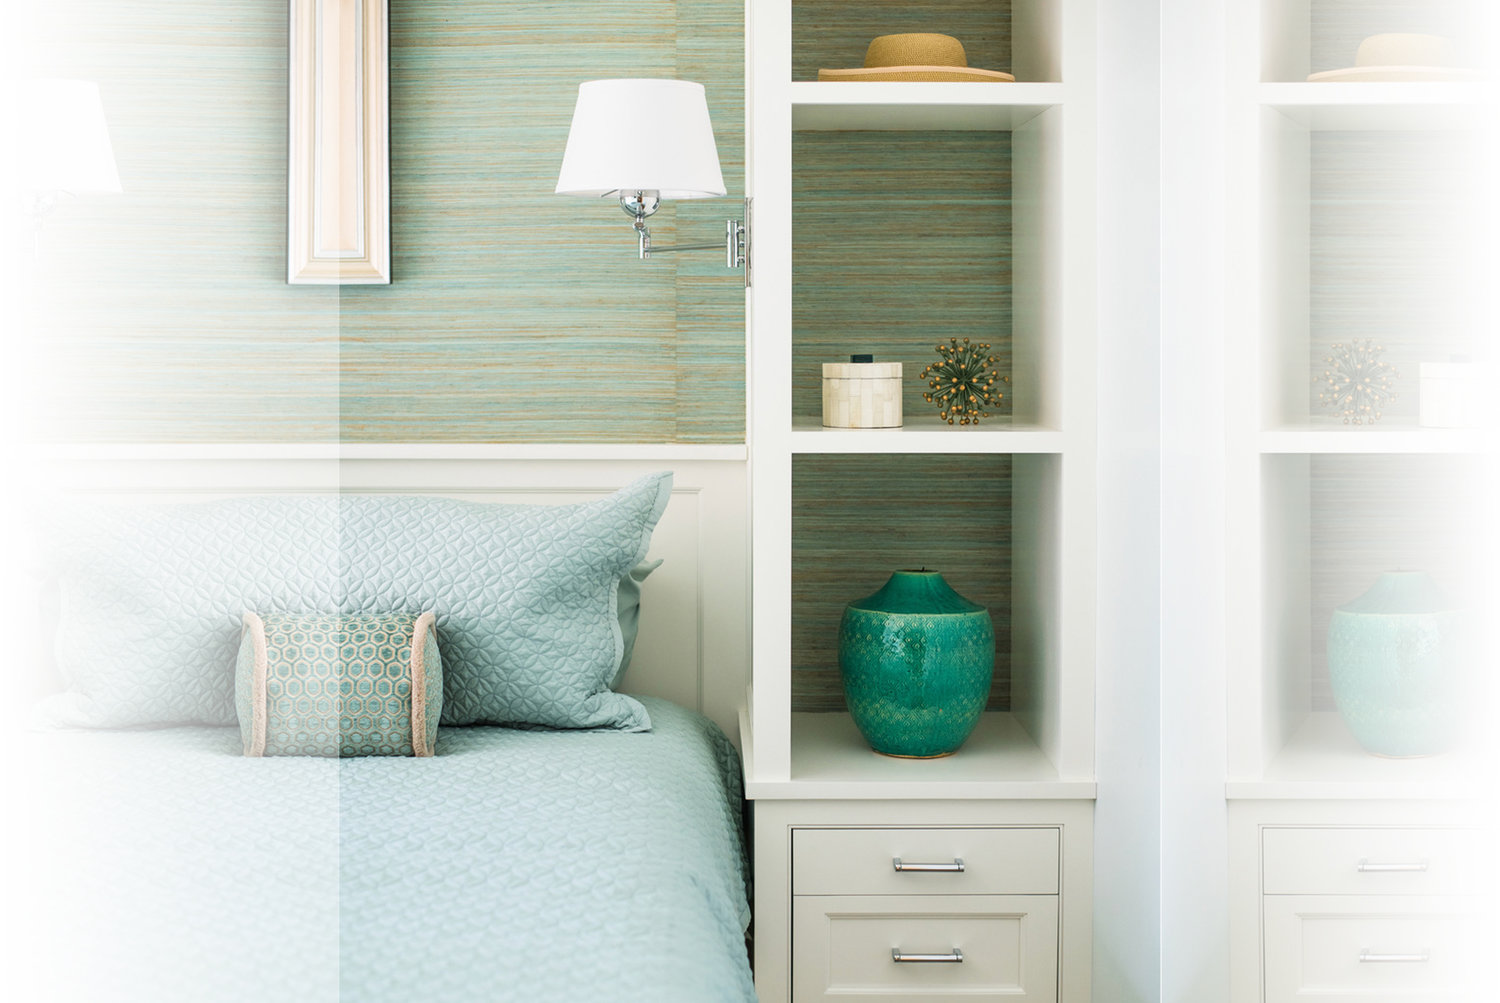 A built-in bookcase serves as a nightstand with display space.